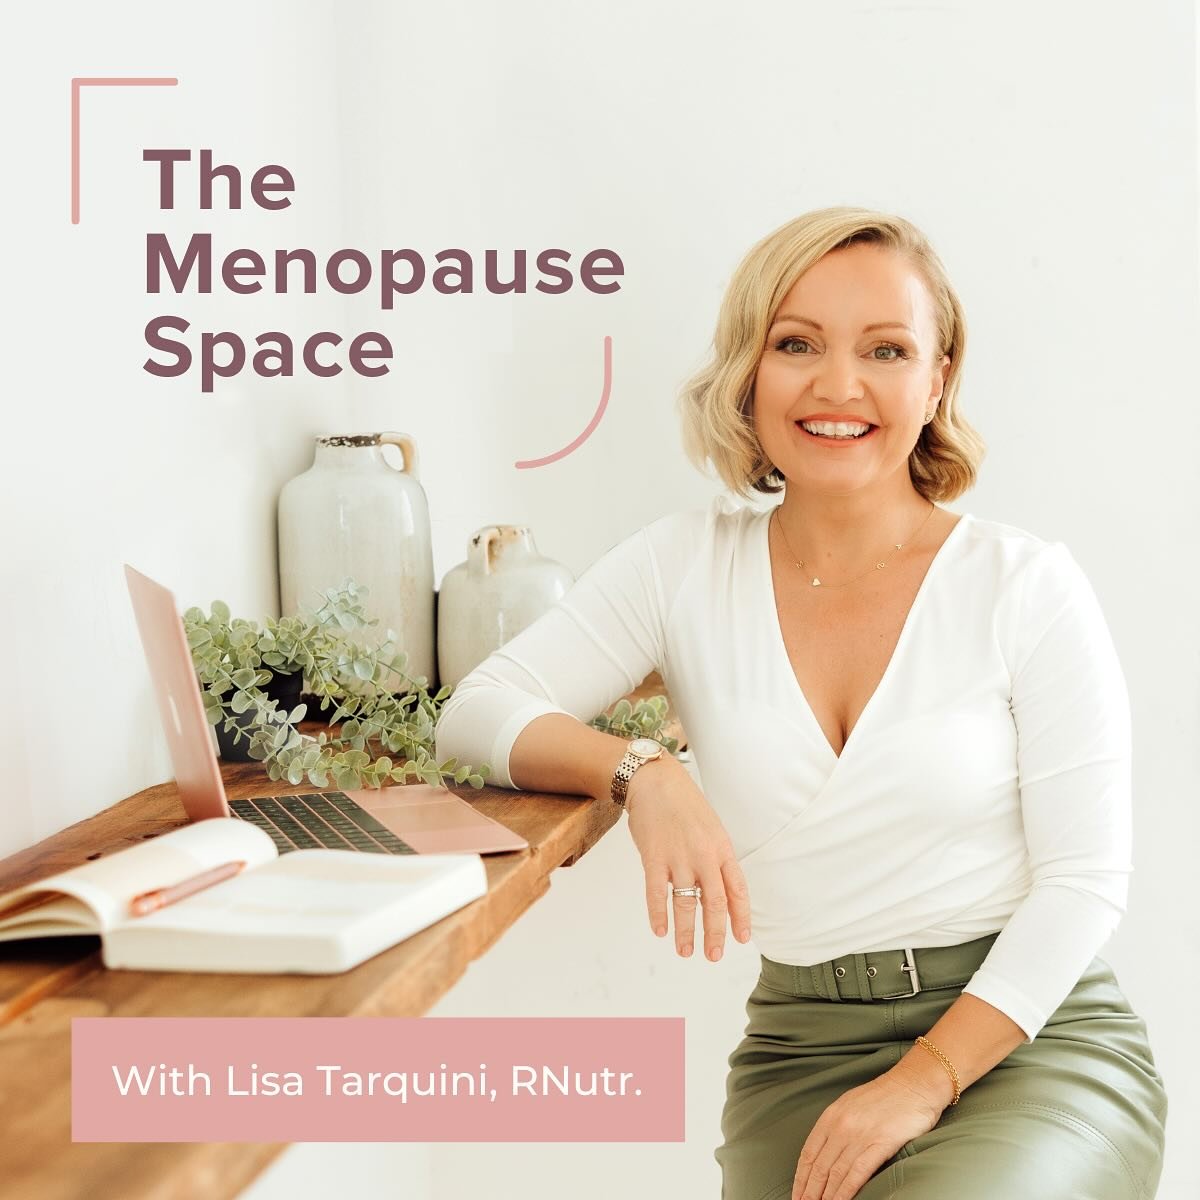 🎉New Podcast Episode✨

How can nutrition support your midlife health destination? 

https://podcasts.apple.com/hk/podcast/the-menopause-space/id1695121737

#podcast #menopausenutrition